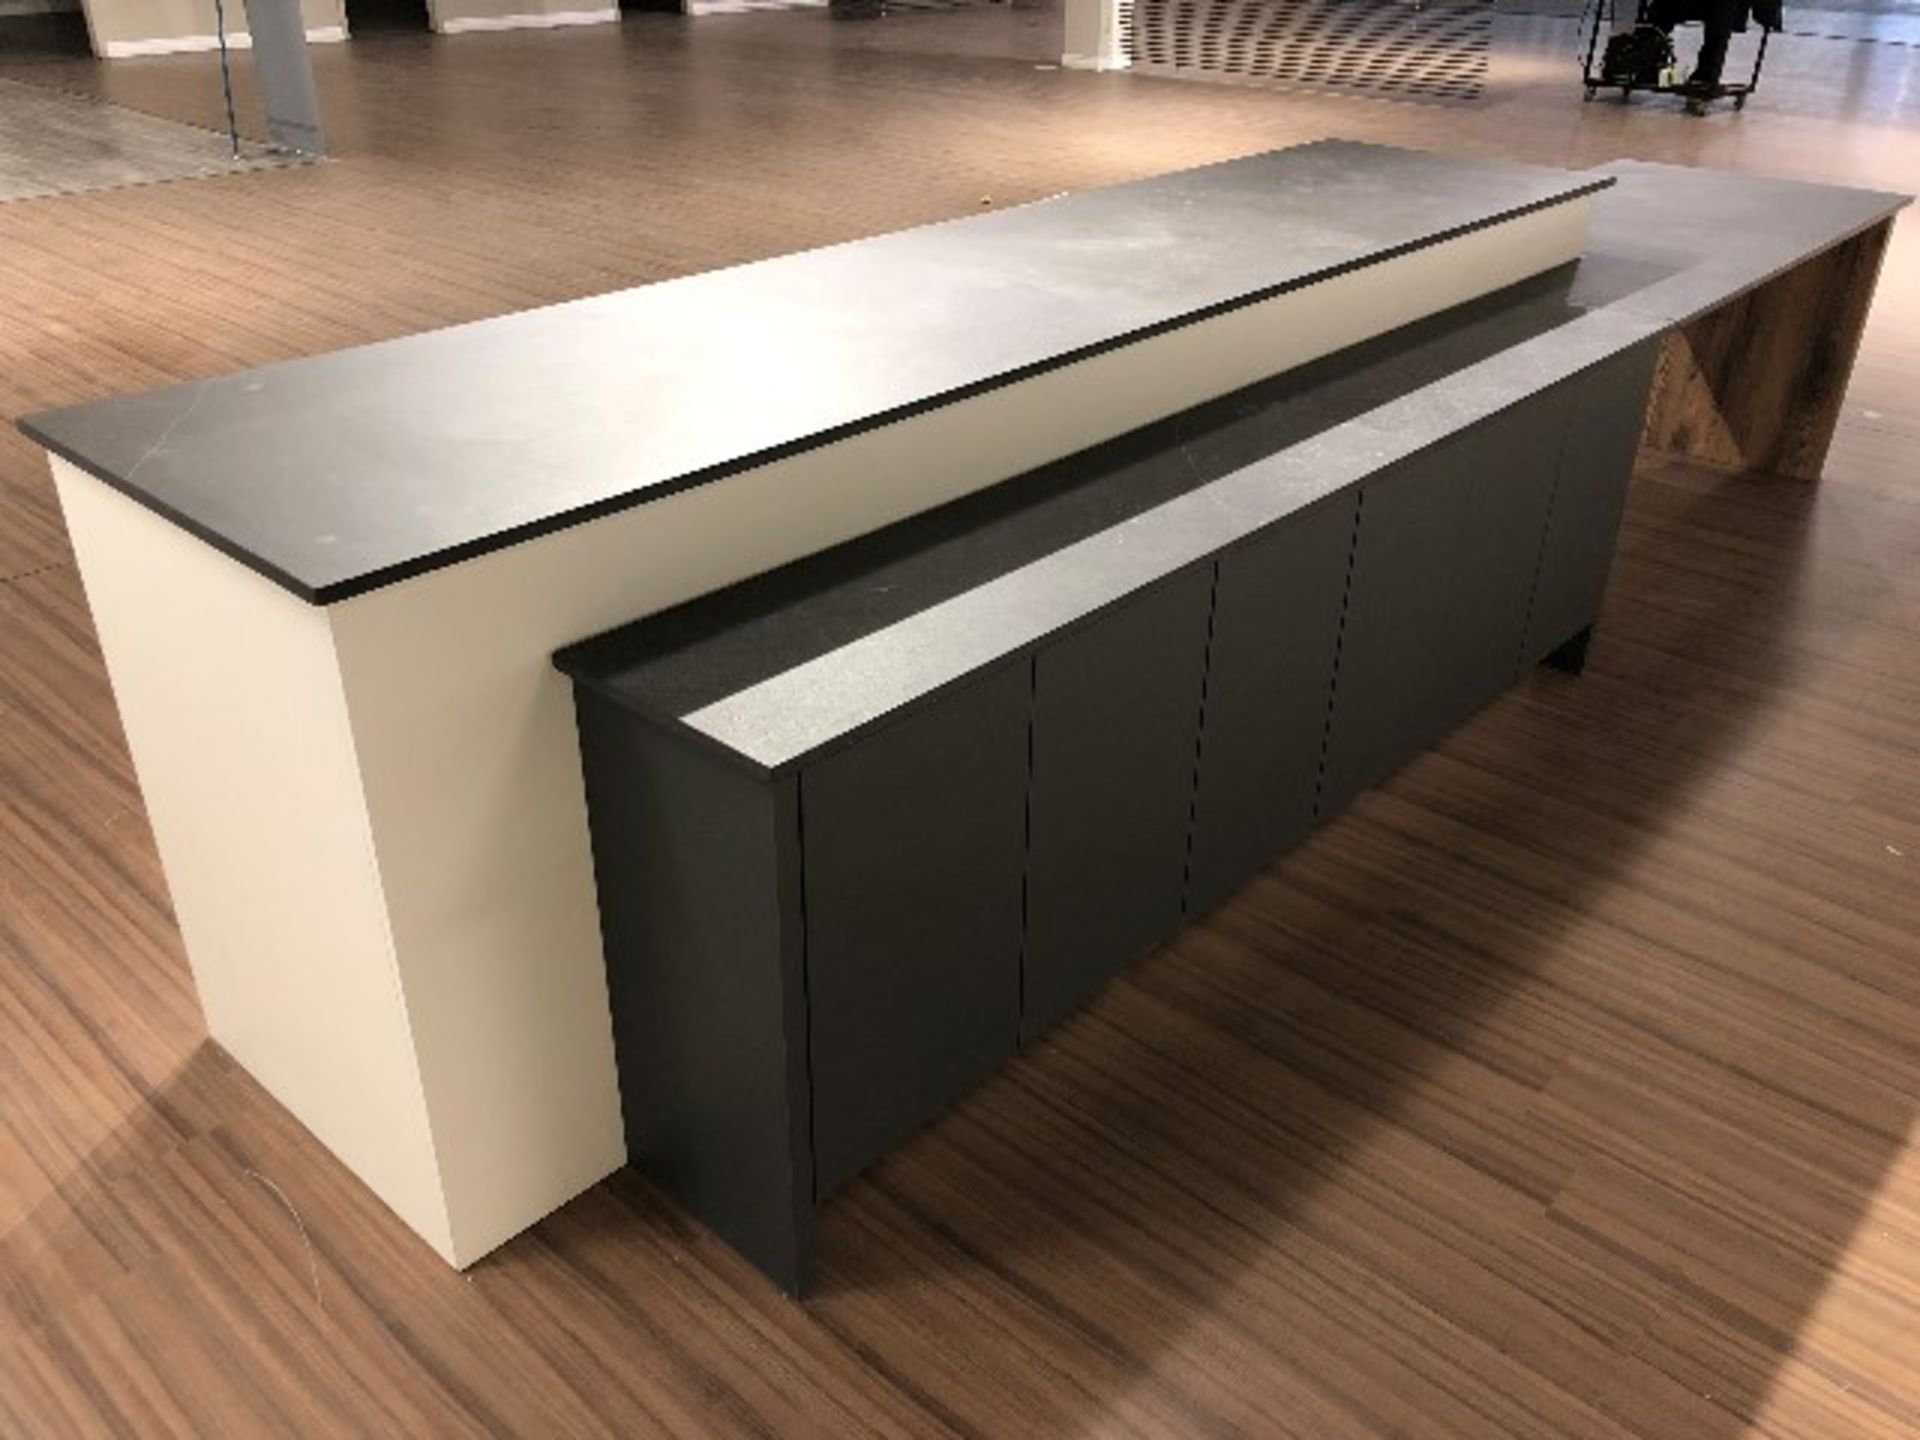 Countertop cabinet w/side tabel, 162”x40” - Image 2 of 2